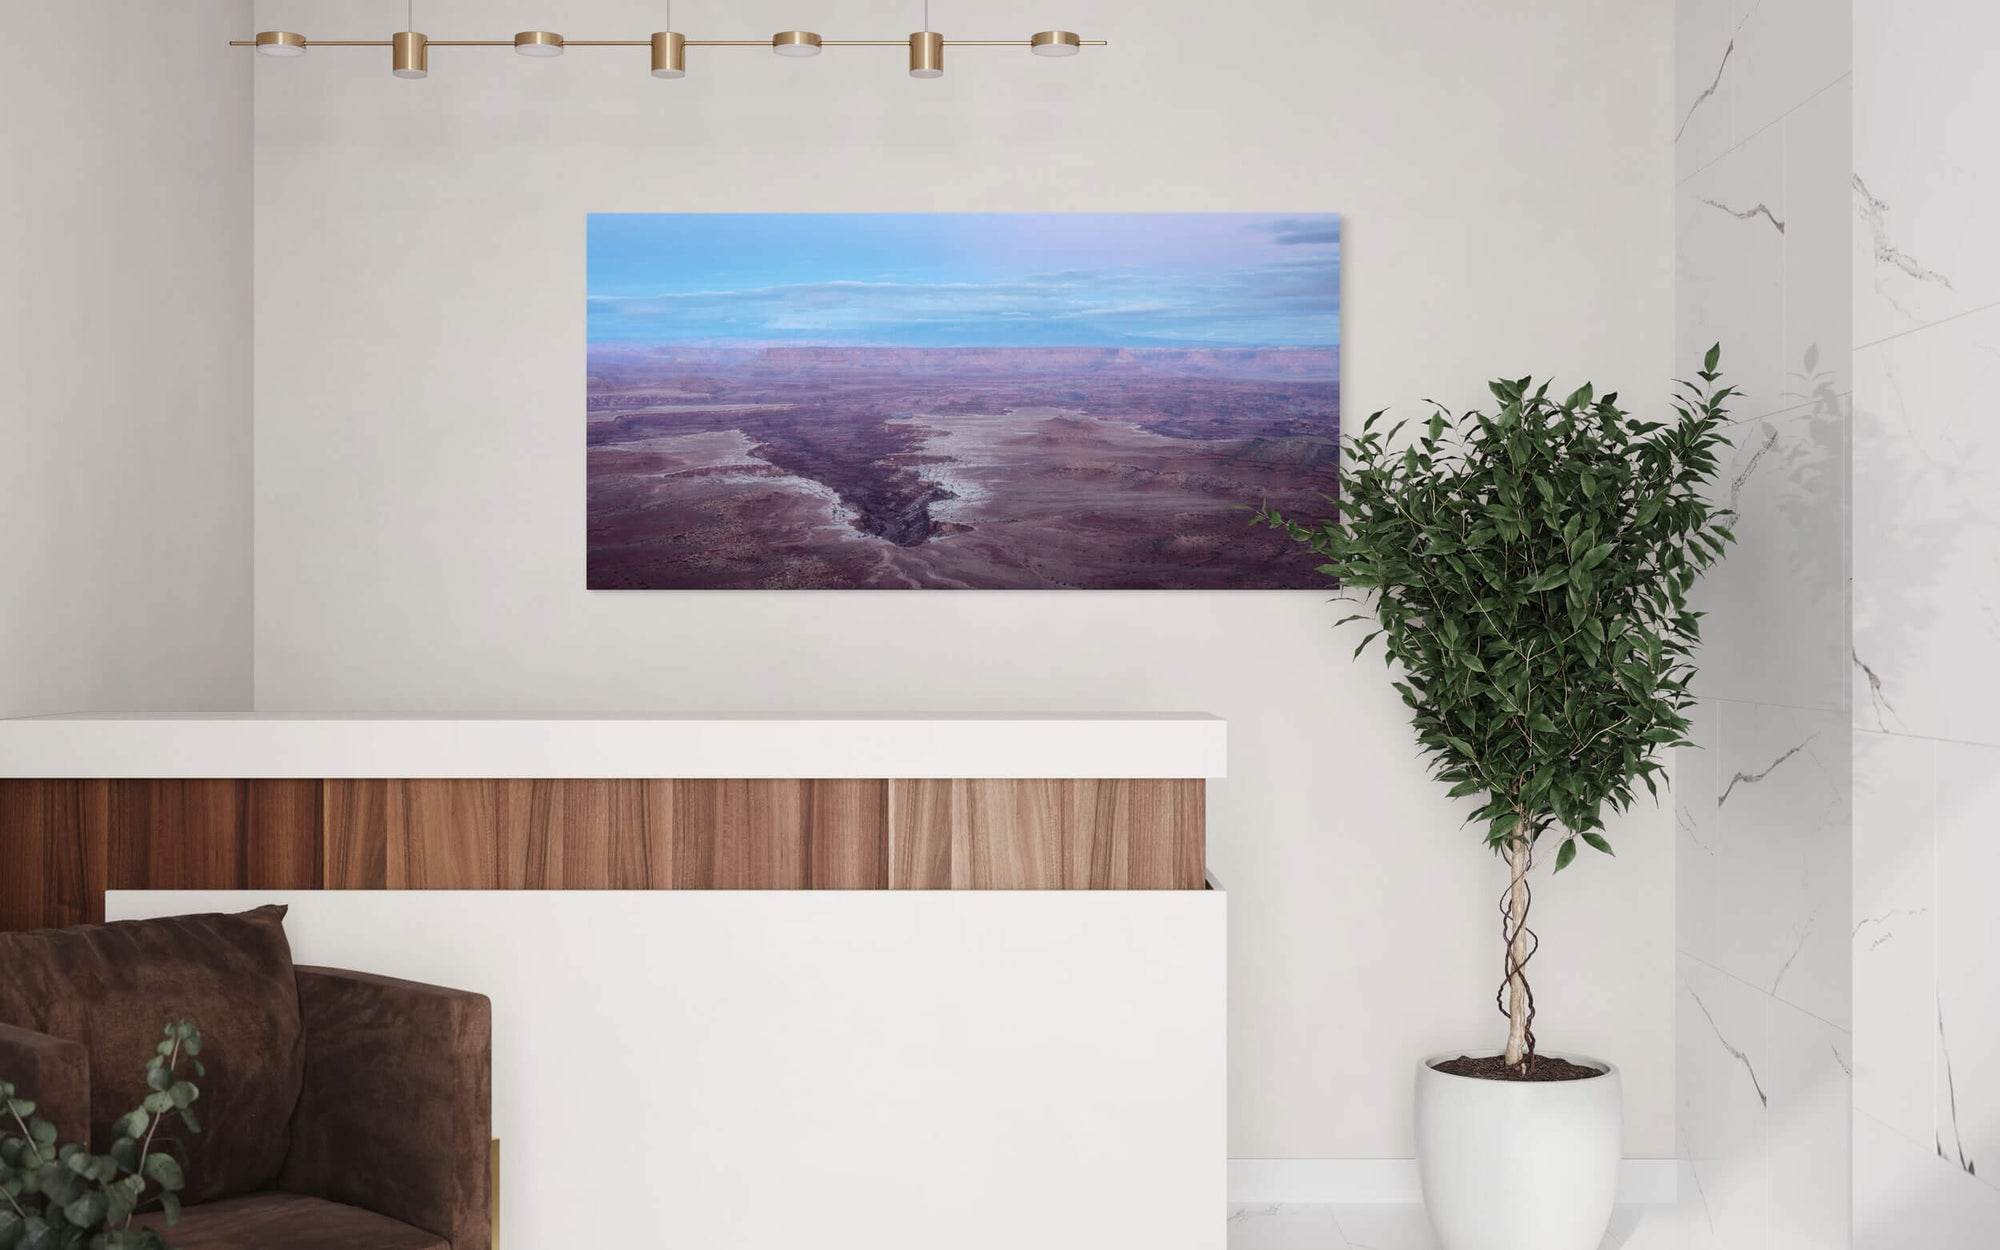 A piece of Moab art showing a Canyonlands National Park picture at sunset hangs in a living room.